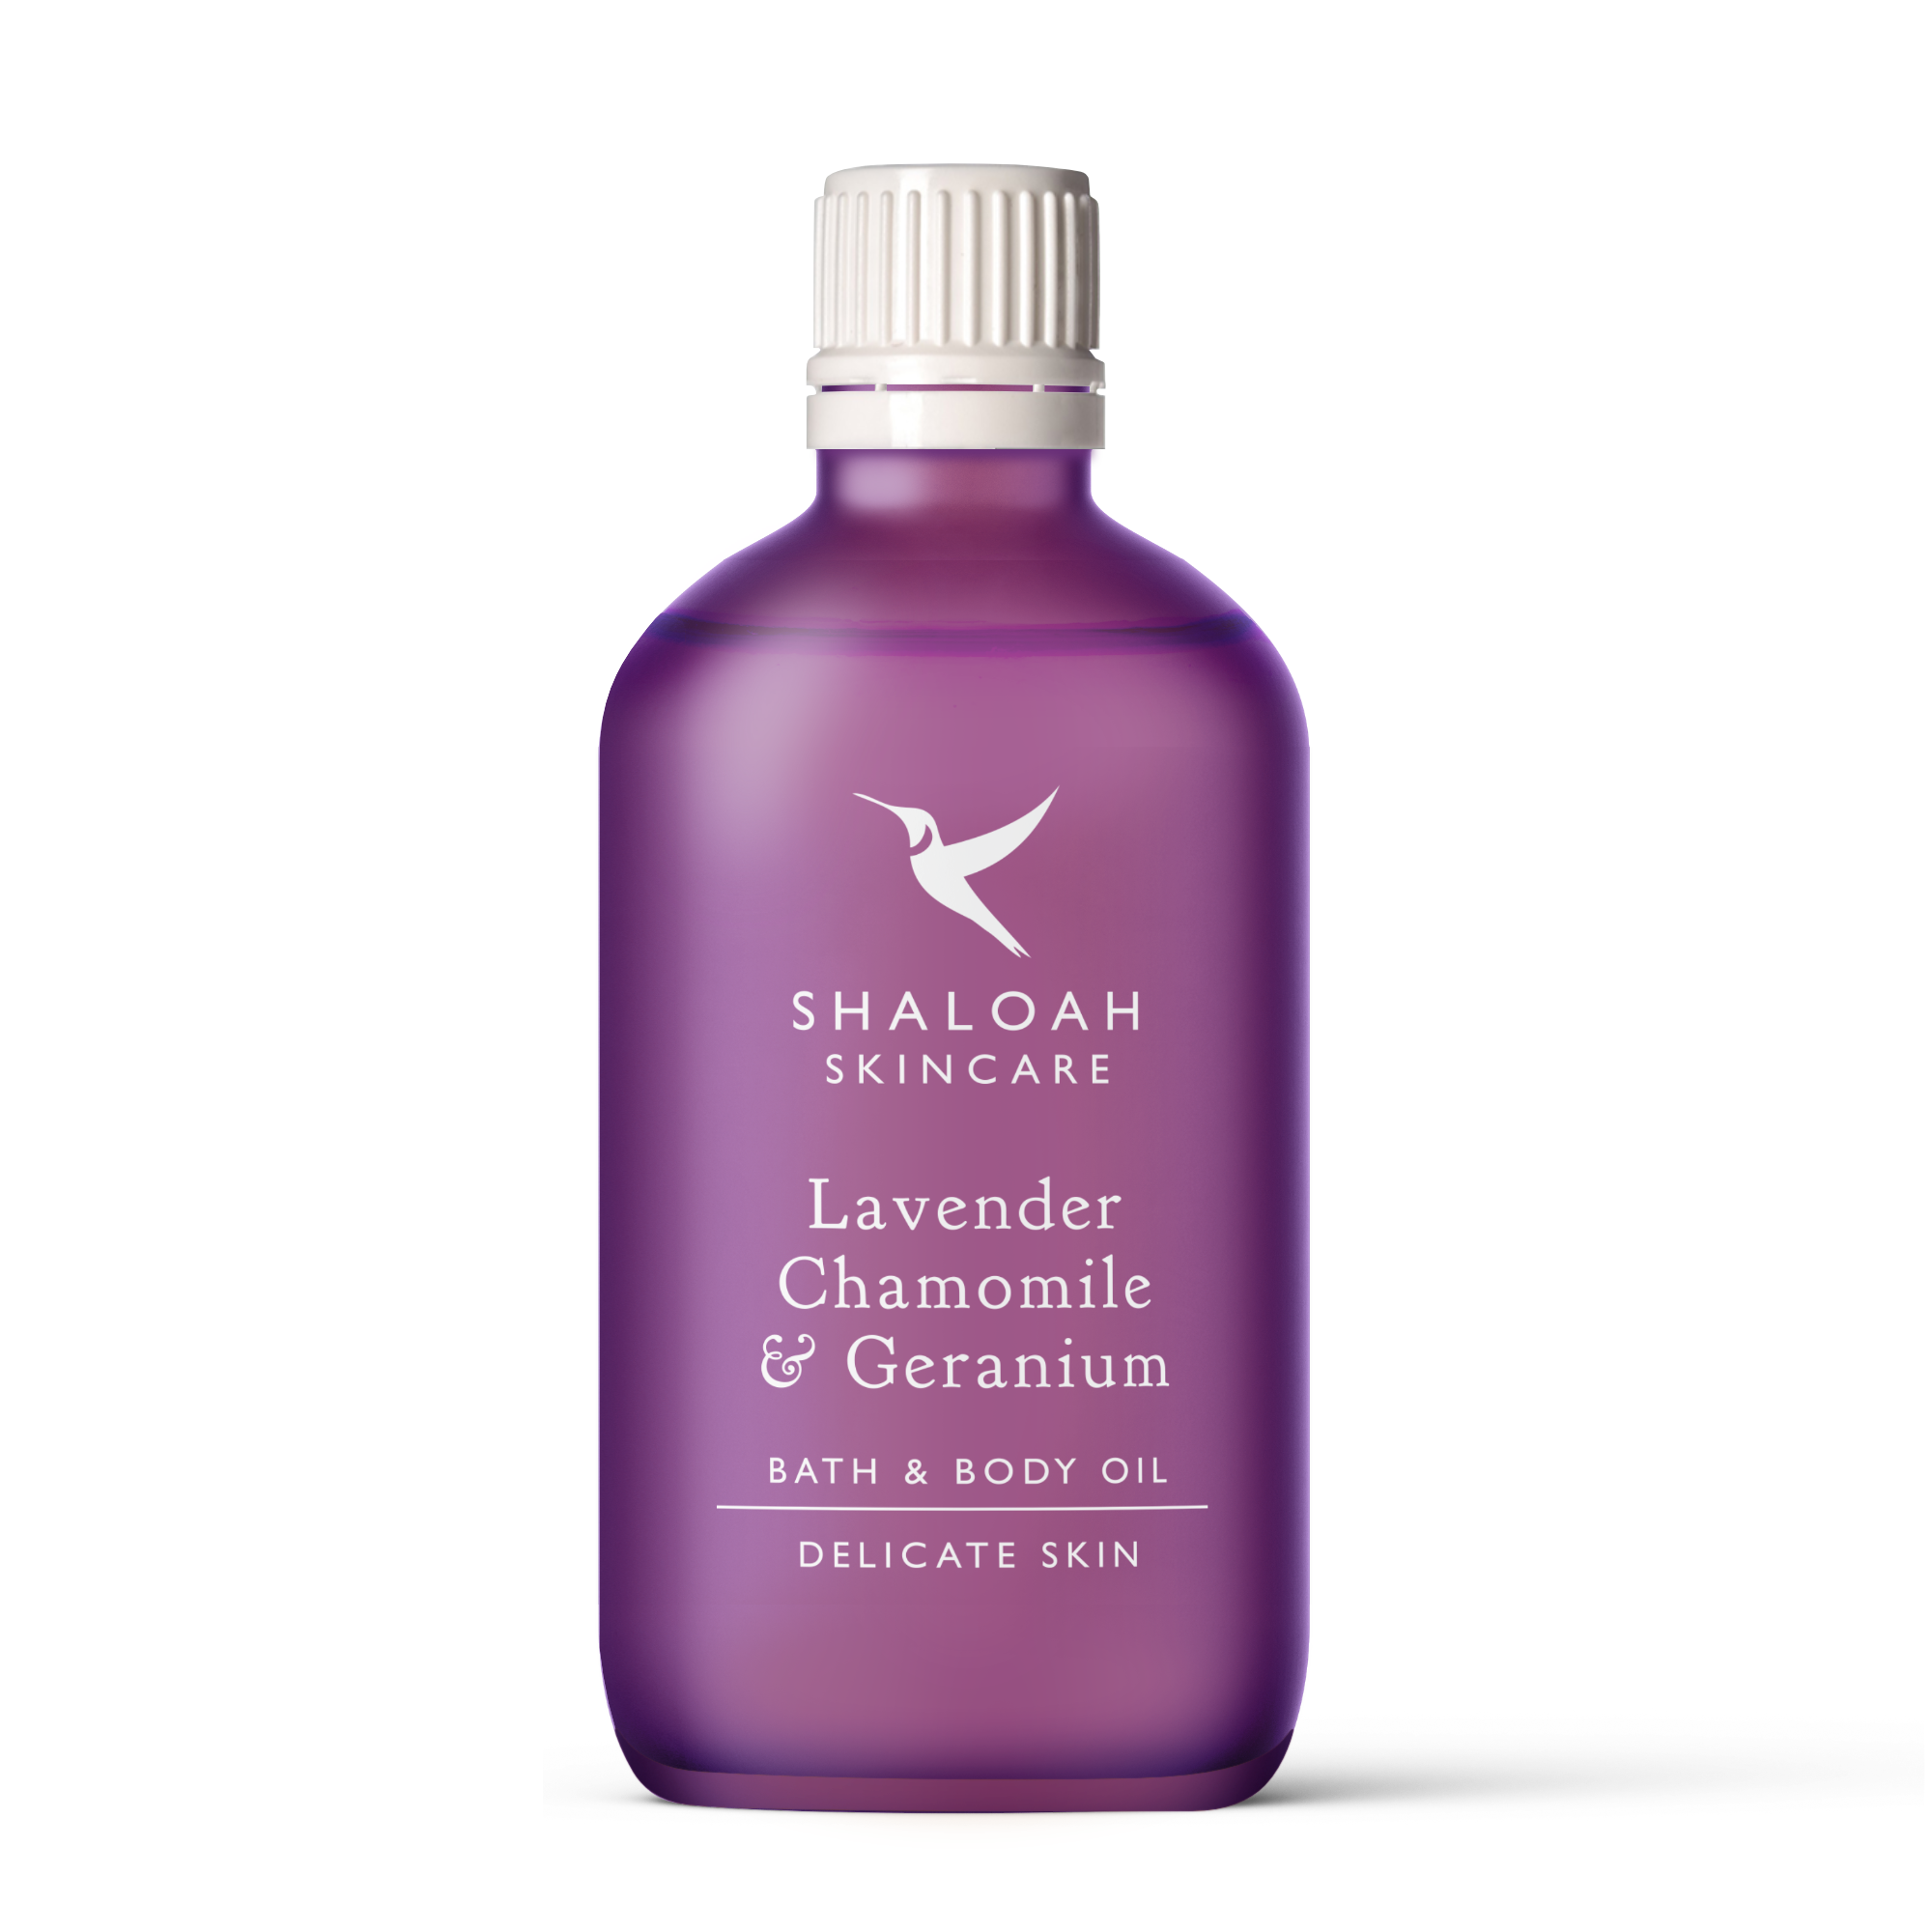 LAVENDER CHAMOMILE & GERANIUM BATH & BODY OIL _ Organic Gifts _ Beauty Products _ Sleep _ Mother's Day _ Body Care _ Spring _ Easter _ Sleep _ Relax  _ Summer _ Spring _ Purple _ Lilac _ Pastel _ Autumn _ Bright _ .jpg